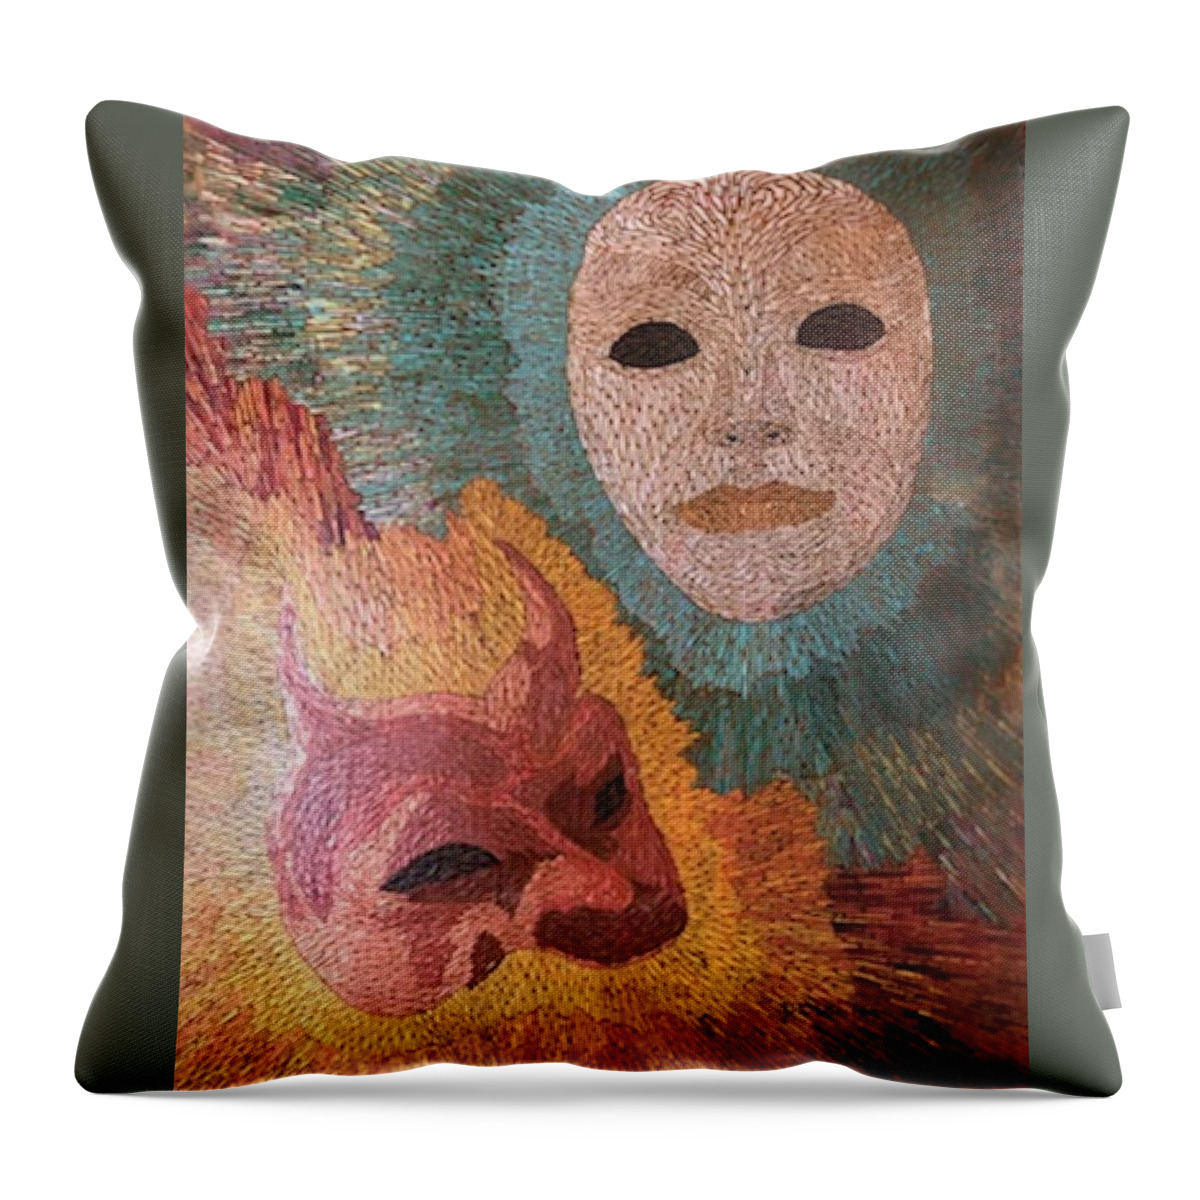 Lust Throw Pillow featuring the painting Lust by DLWhitson